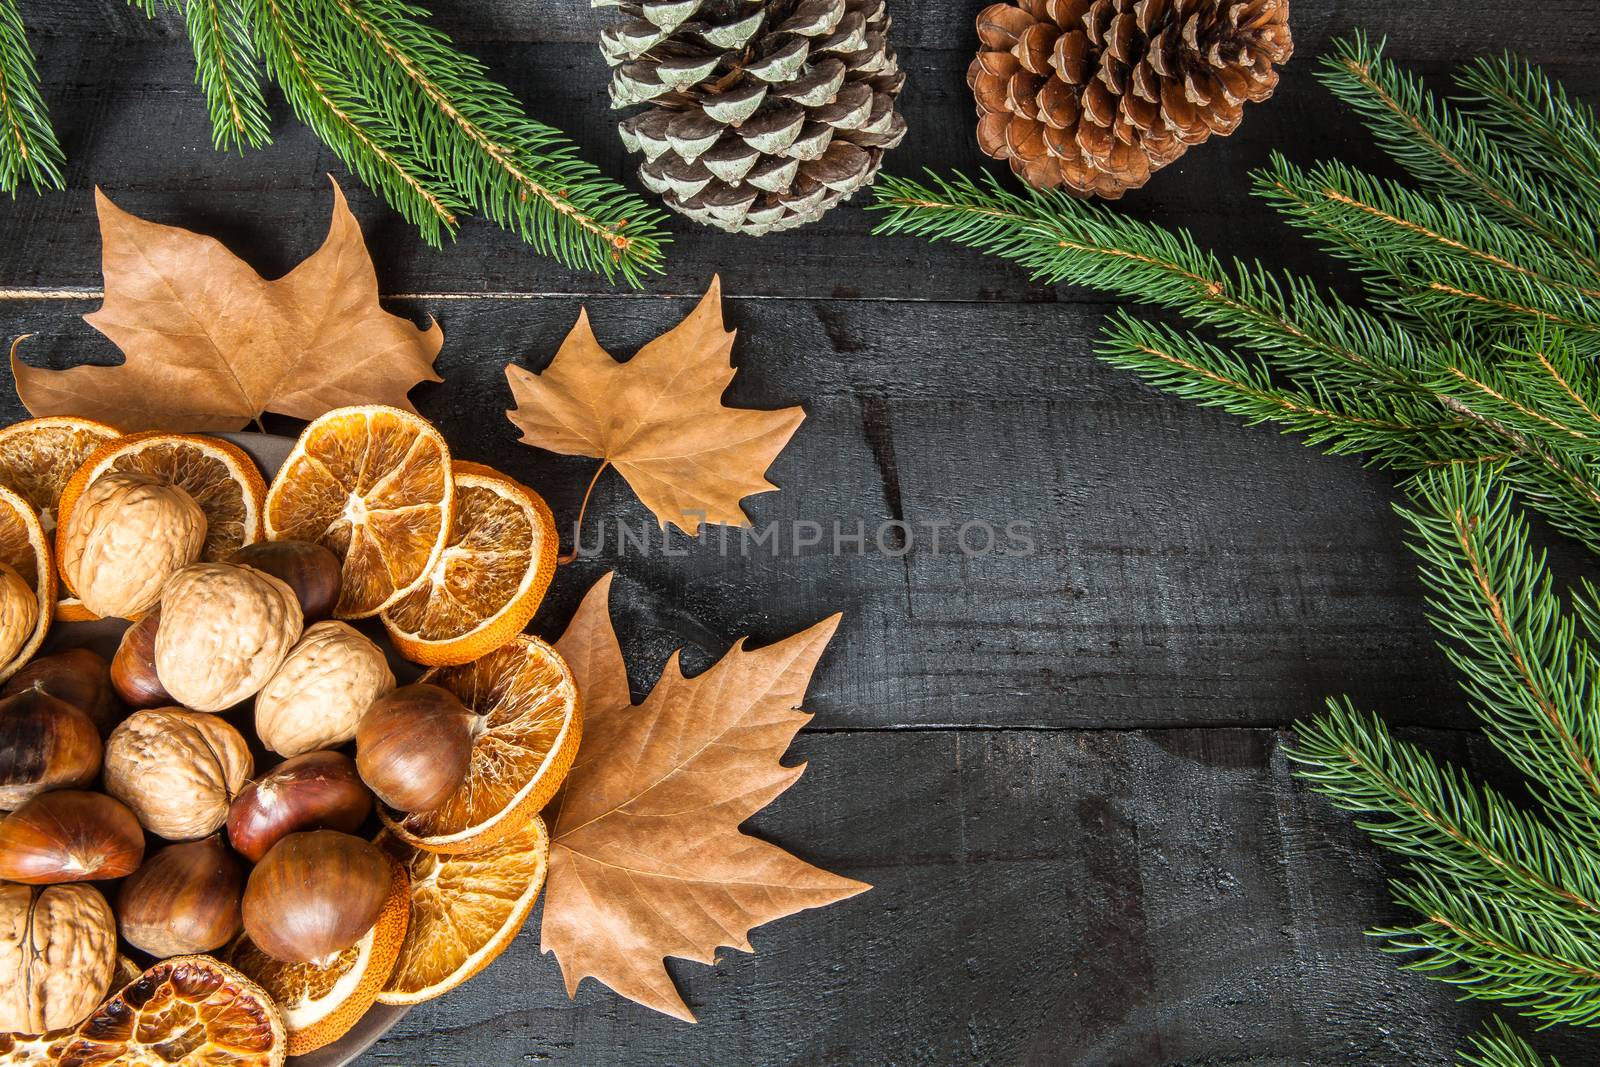 Composition of cutlery on wood background for branches and a decorative nuts, dry oranges, pain fruit and leafs for informal dinners or family celebrations in autumn winter season